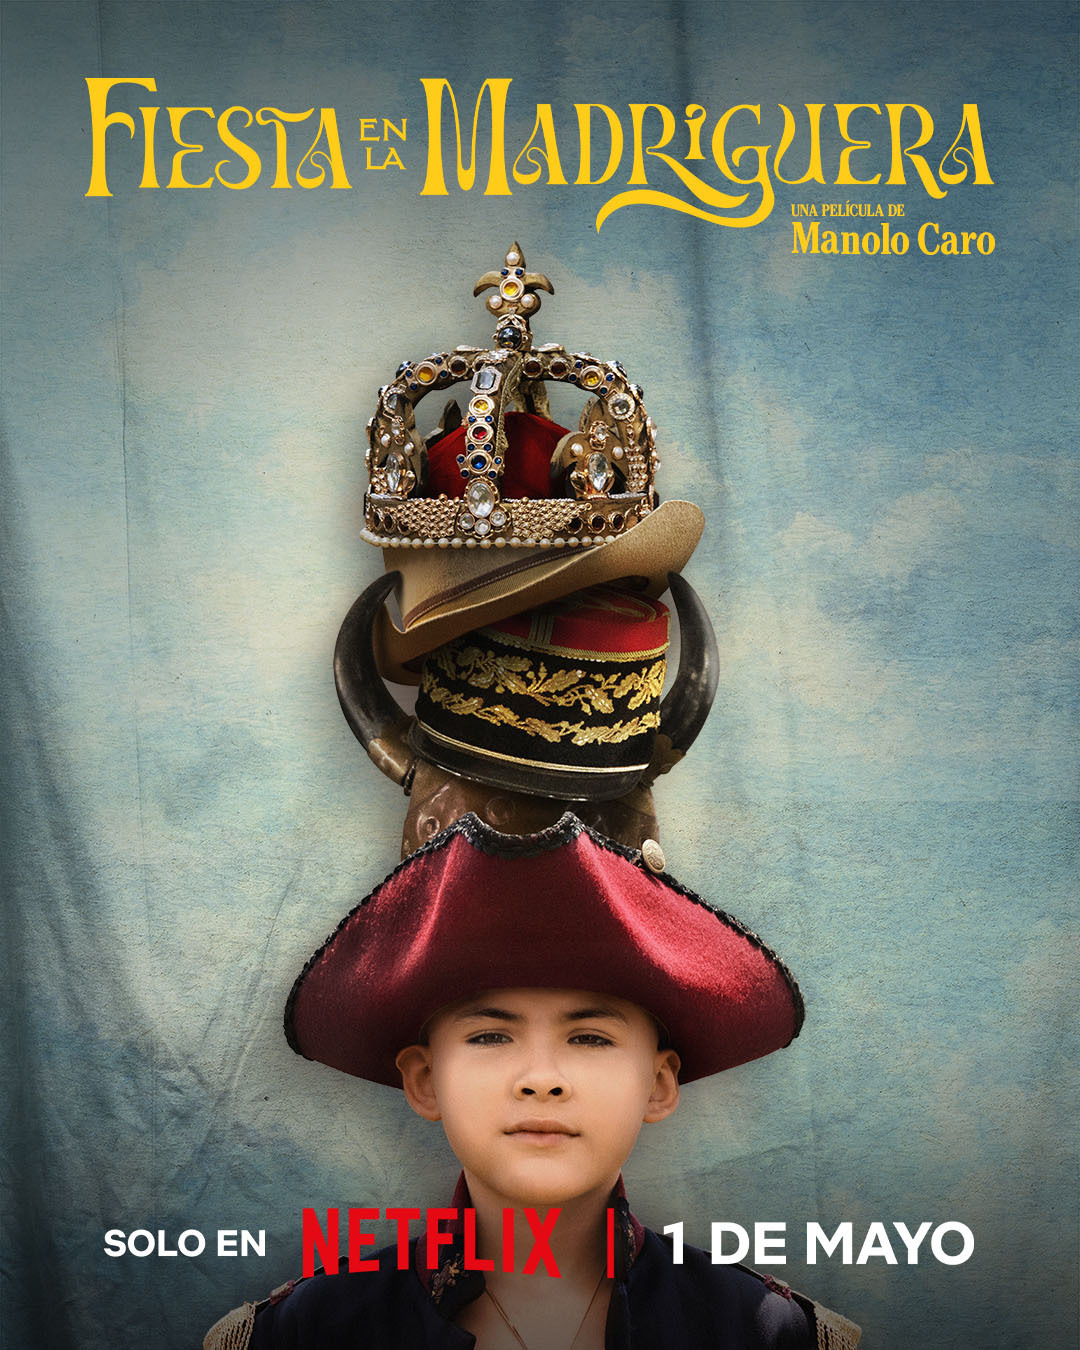 Extra Large Movie Poster Image for Fiesta en la madriguera (#2 of 2)